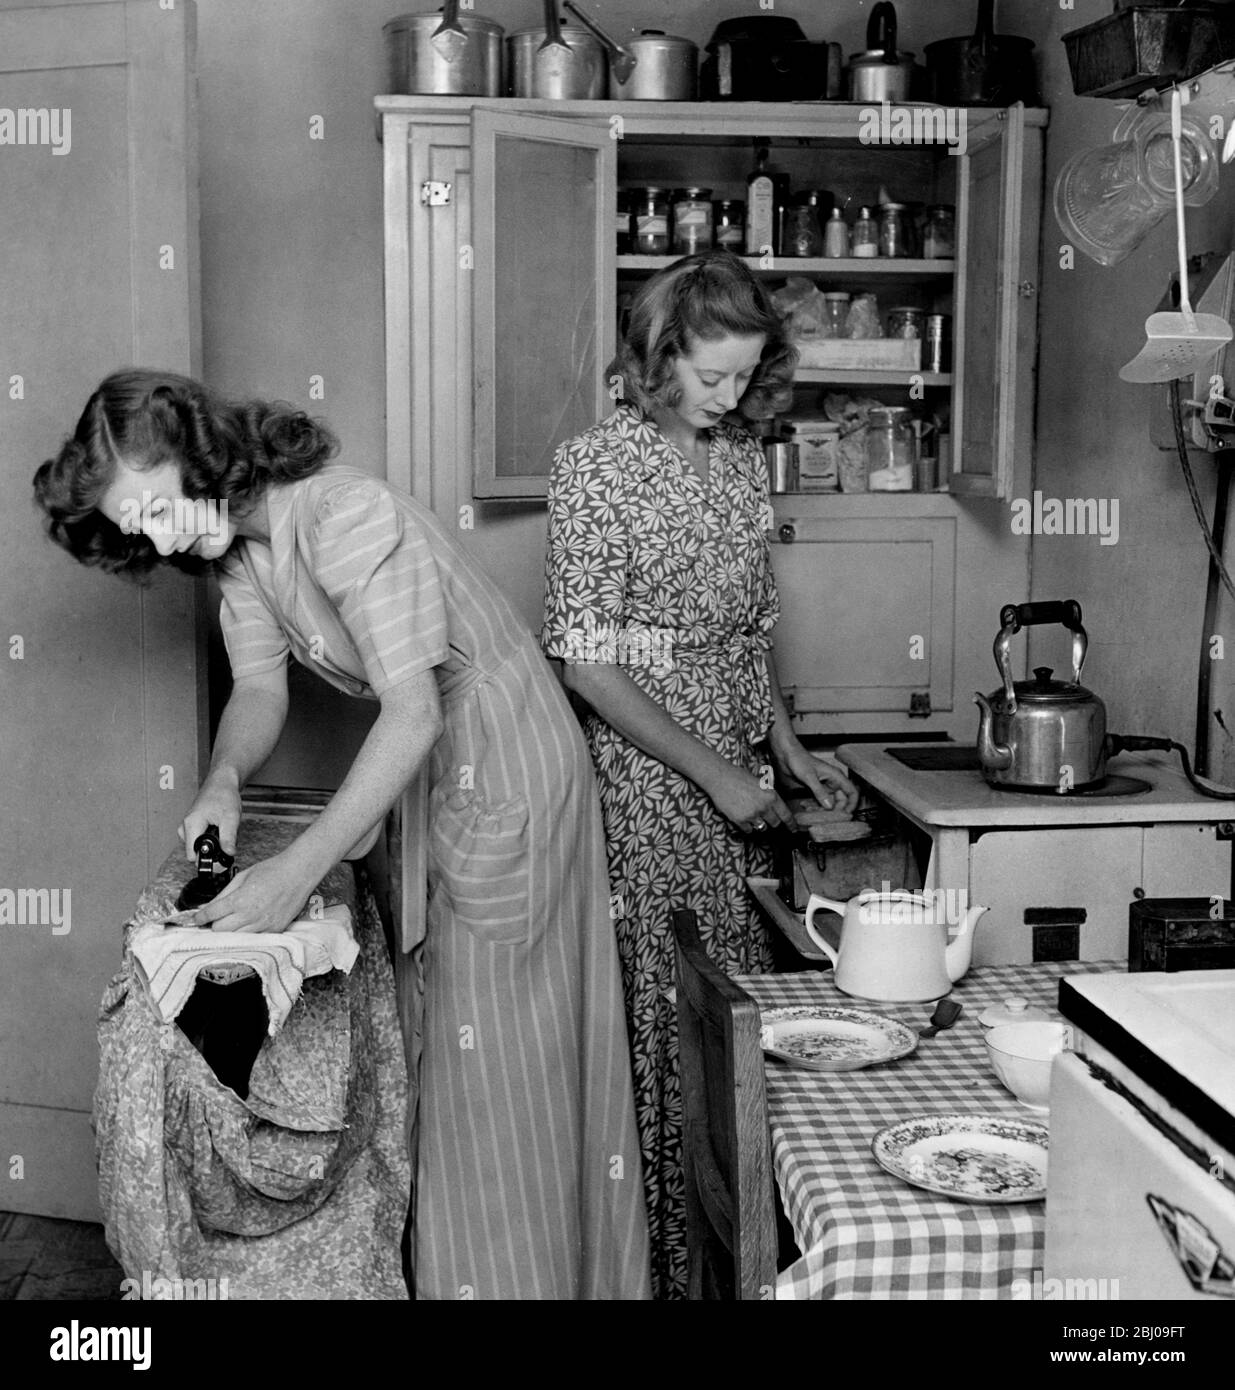 Chorus girls Phyllis Thompson and Riccy Chisholm in their tiny kitchen. - Stock Photo